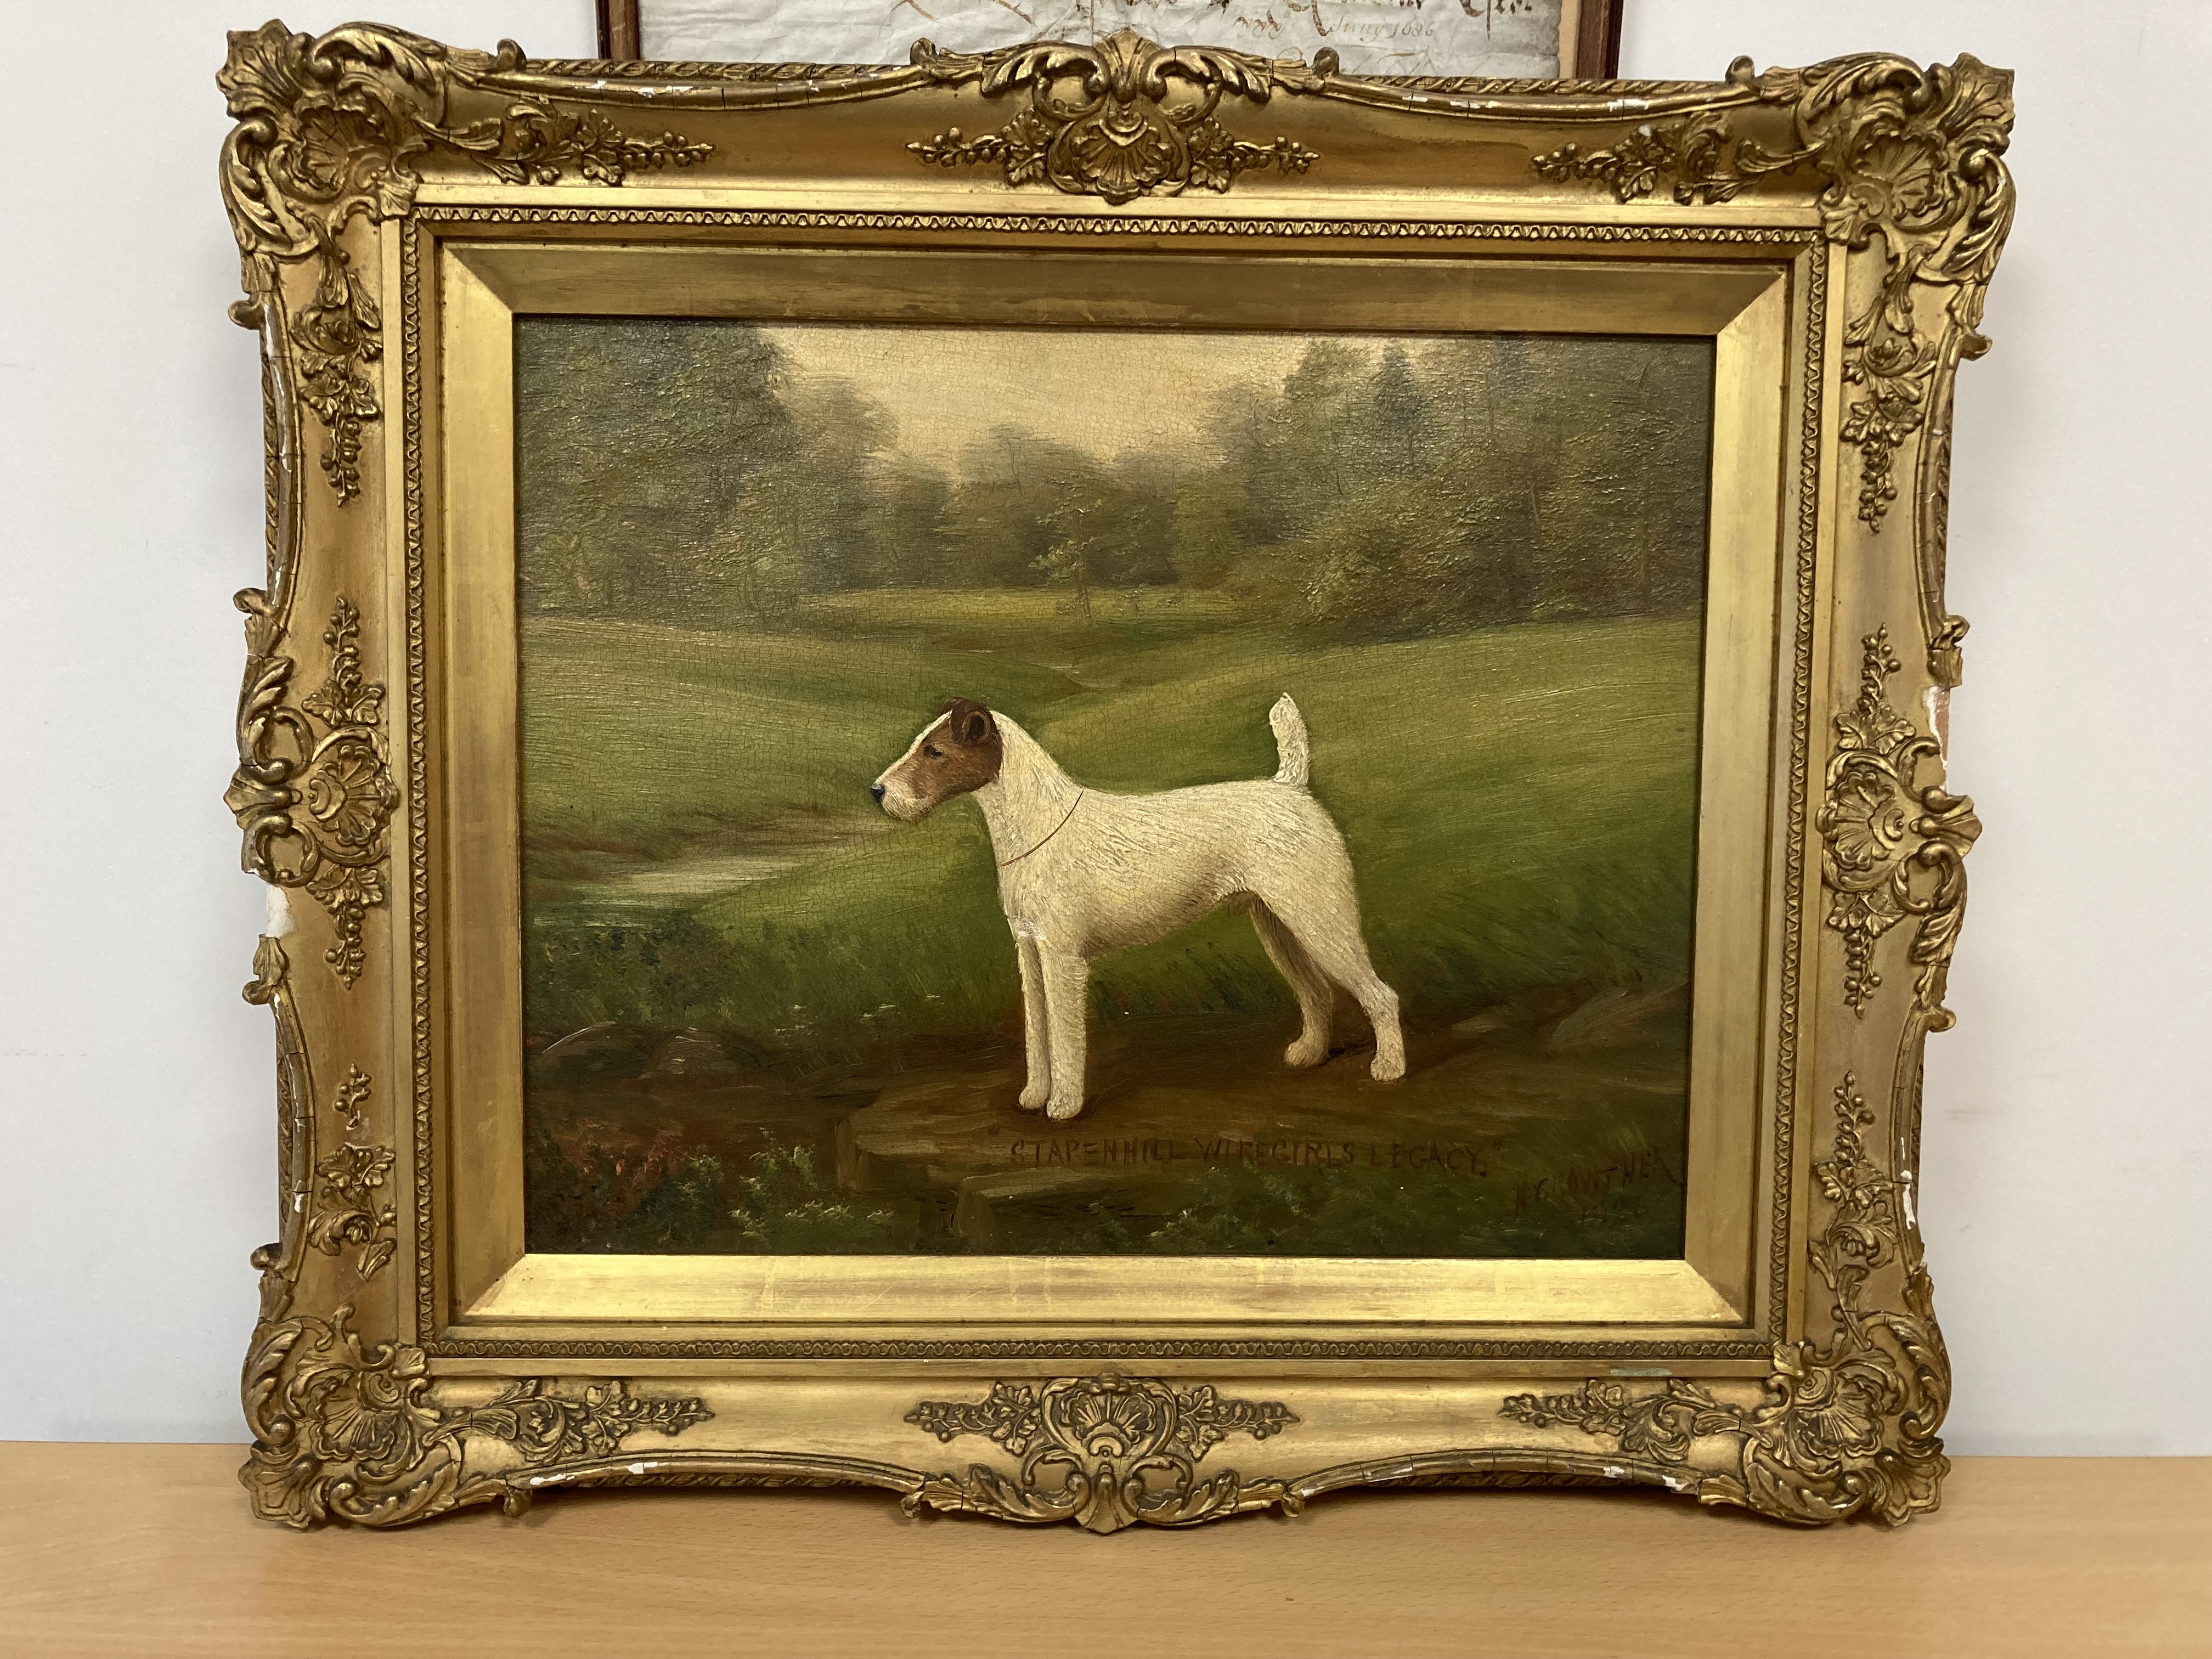 H Crowther 1923, 'Stapenhill Wiregirls Legacy', study of a fox terrier, oil on canvas, - Image 11 of 32